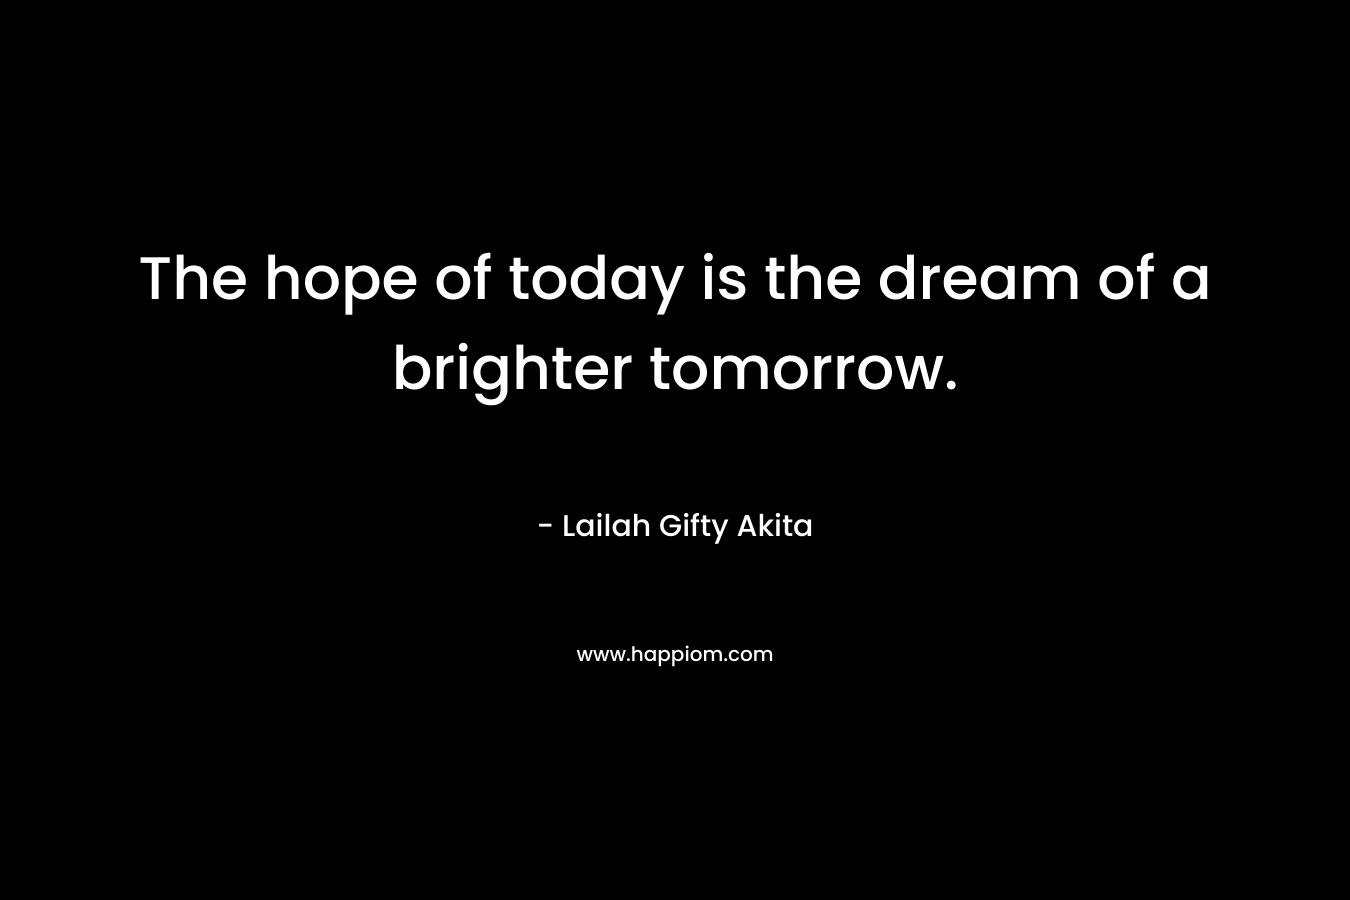 The hope of today is the dream of a brighter tomorrow. – Lailah Gifty Akita